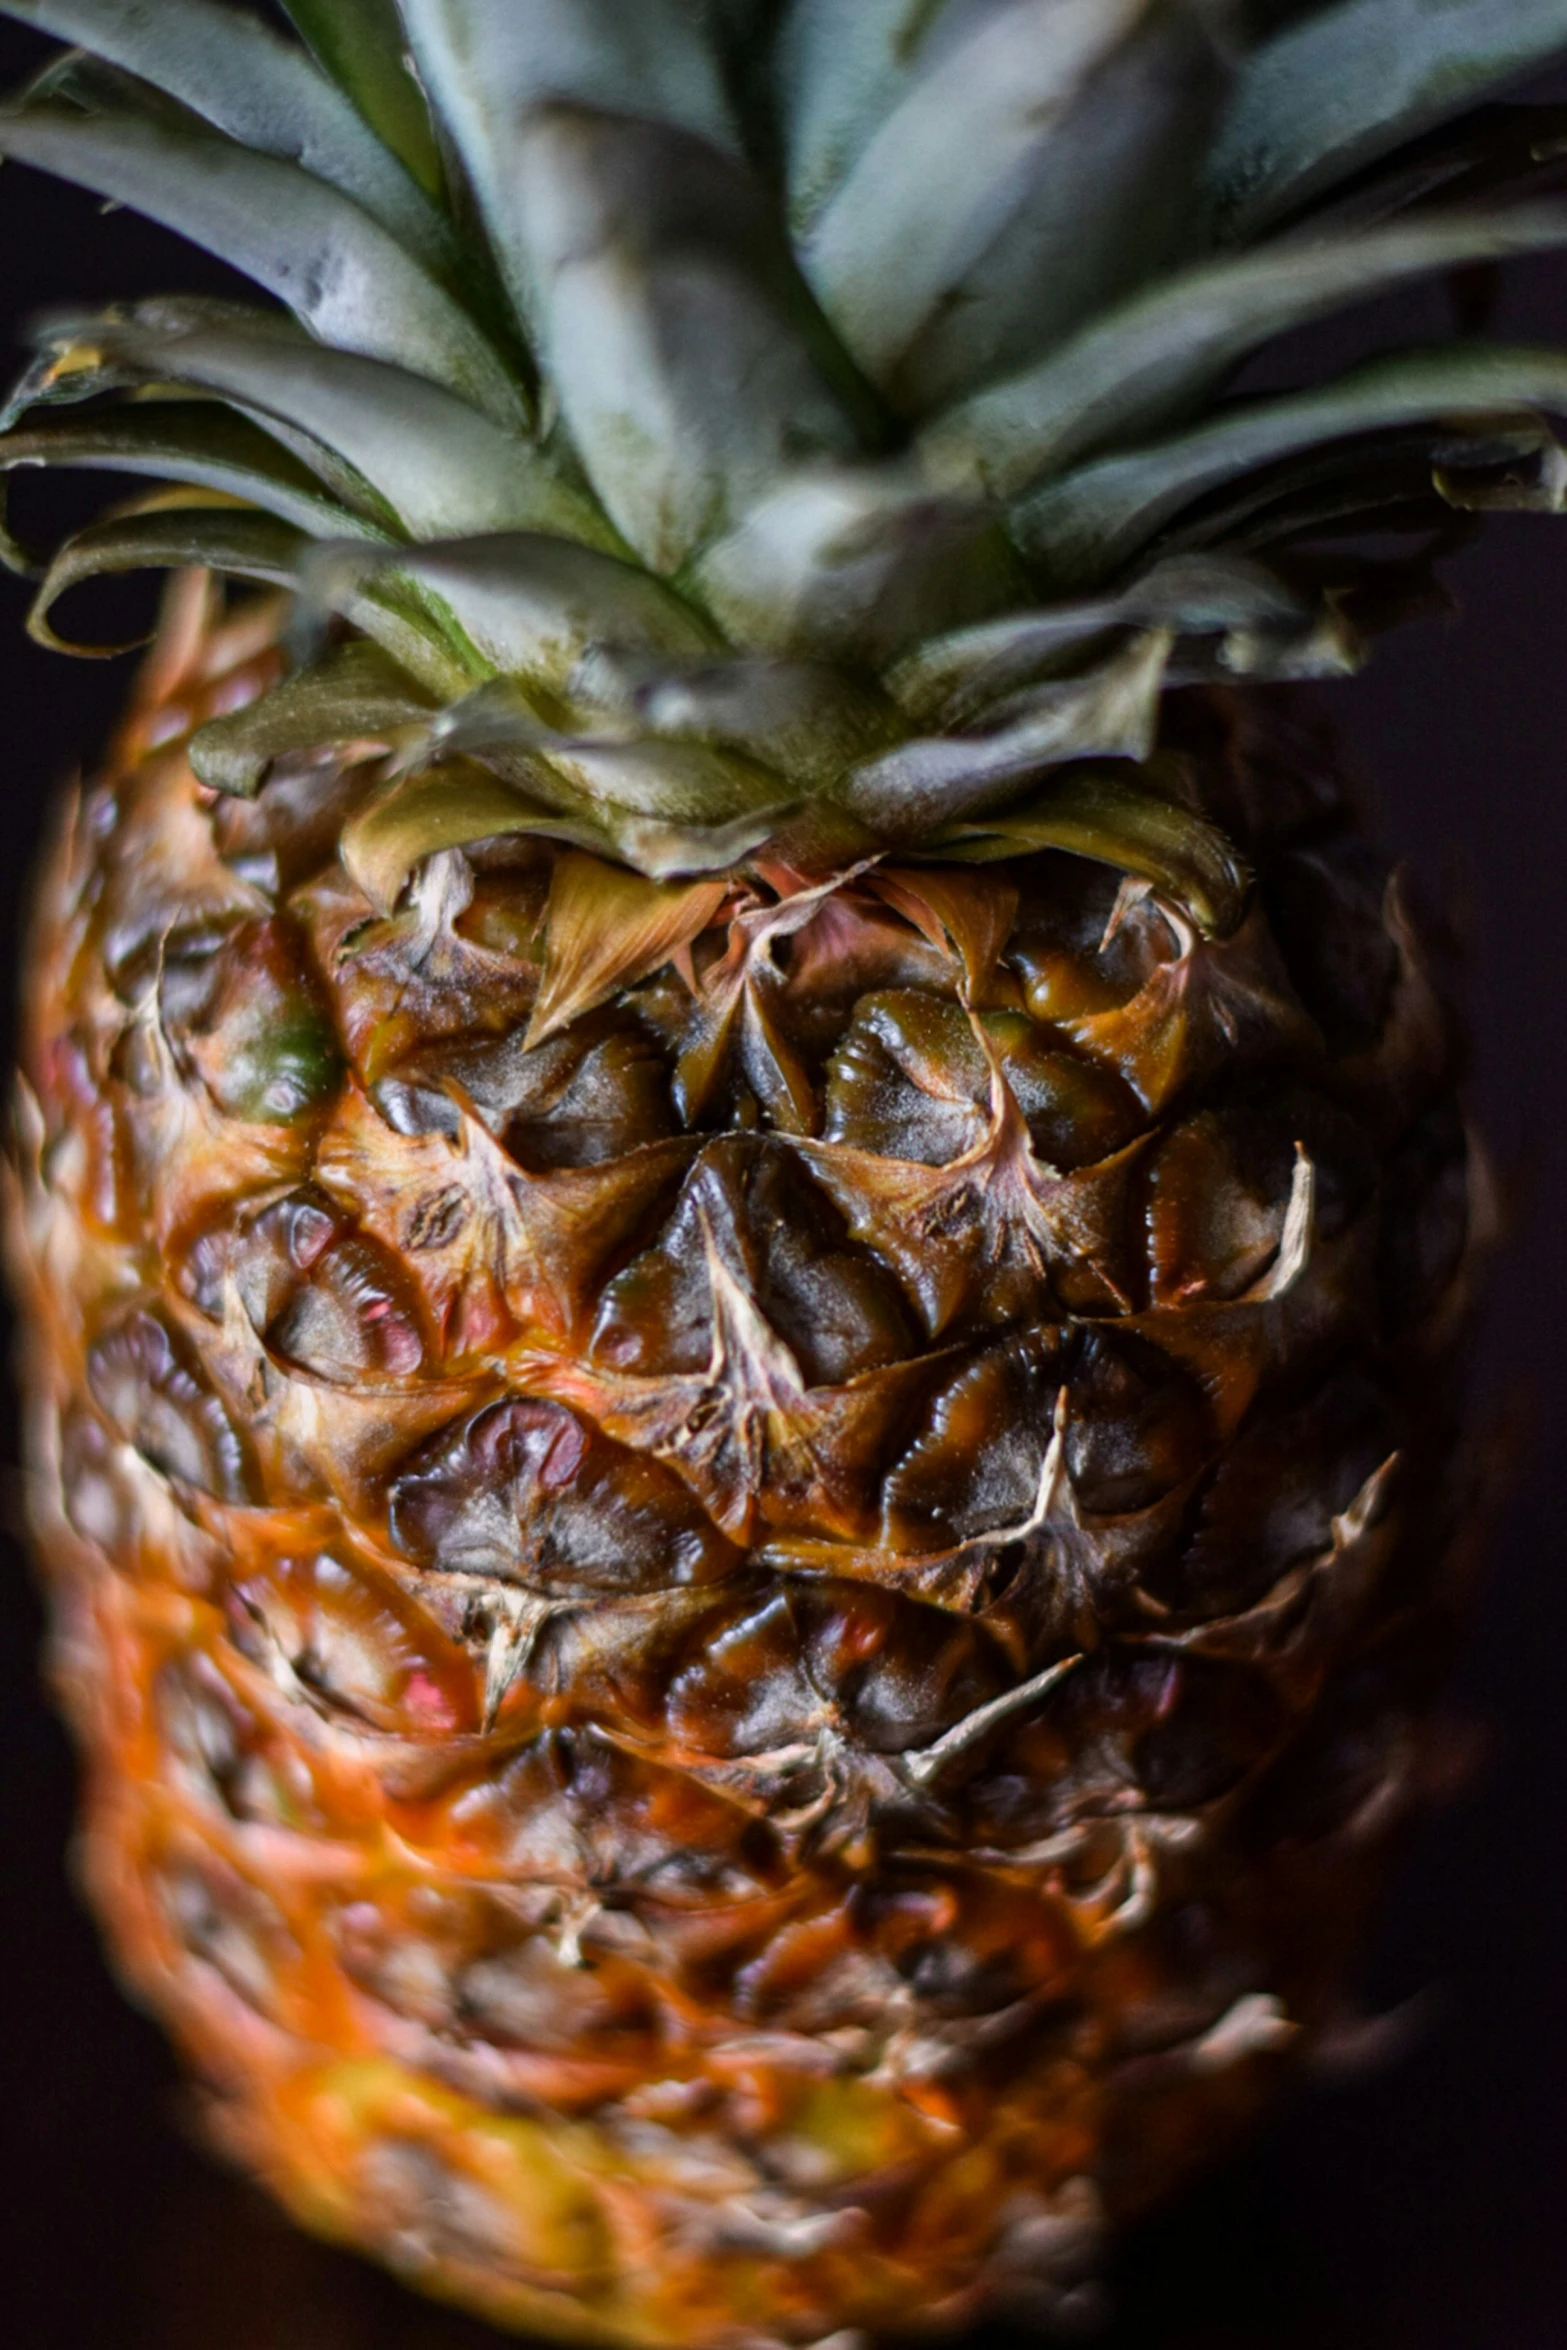 a pineapple with several leaves and some brown spots on it